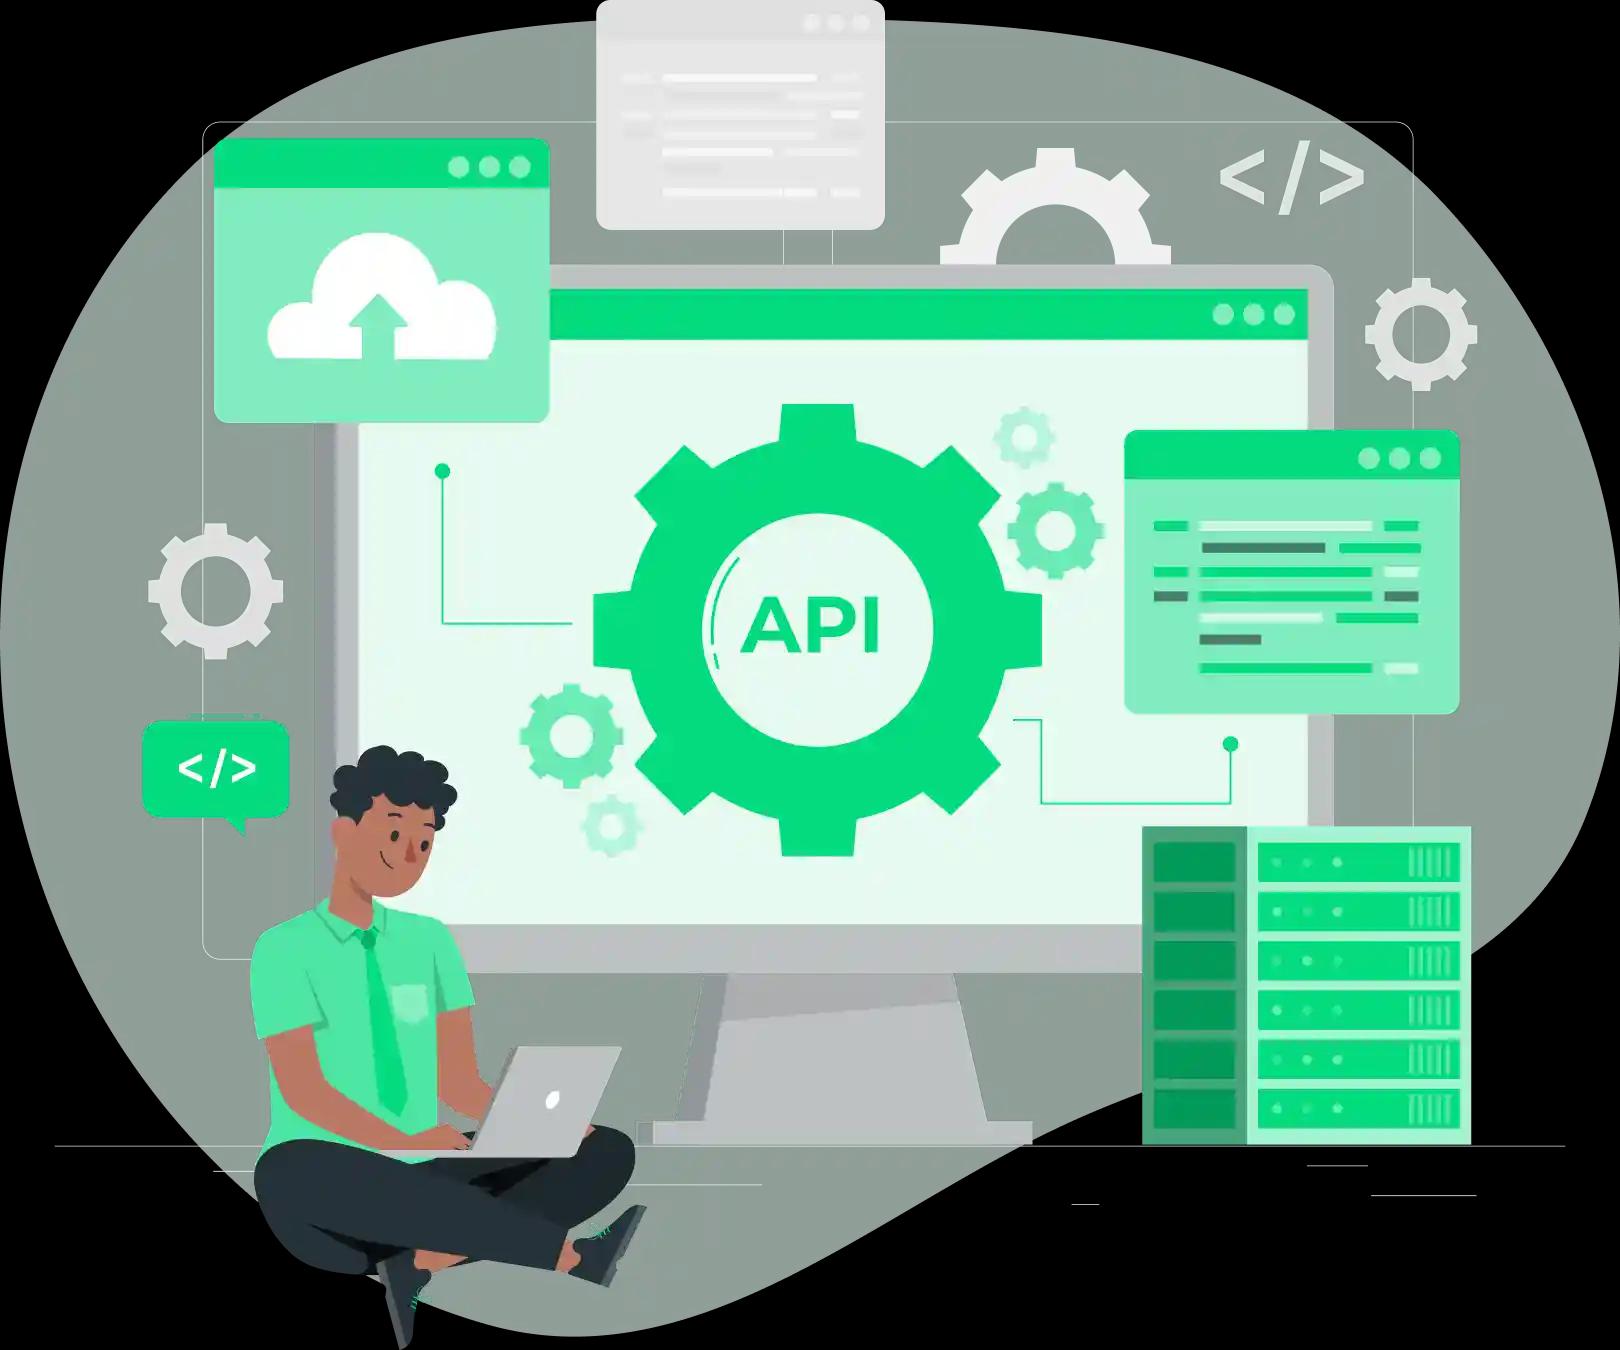 Illustration of a person with a laptop and graphics symbolising API connectivity and cloud services.